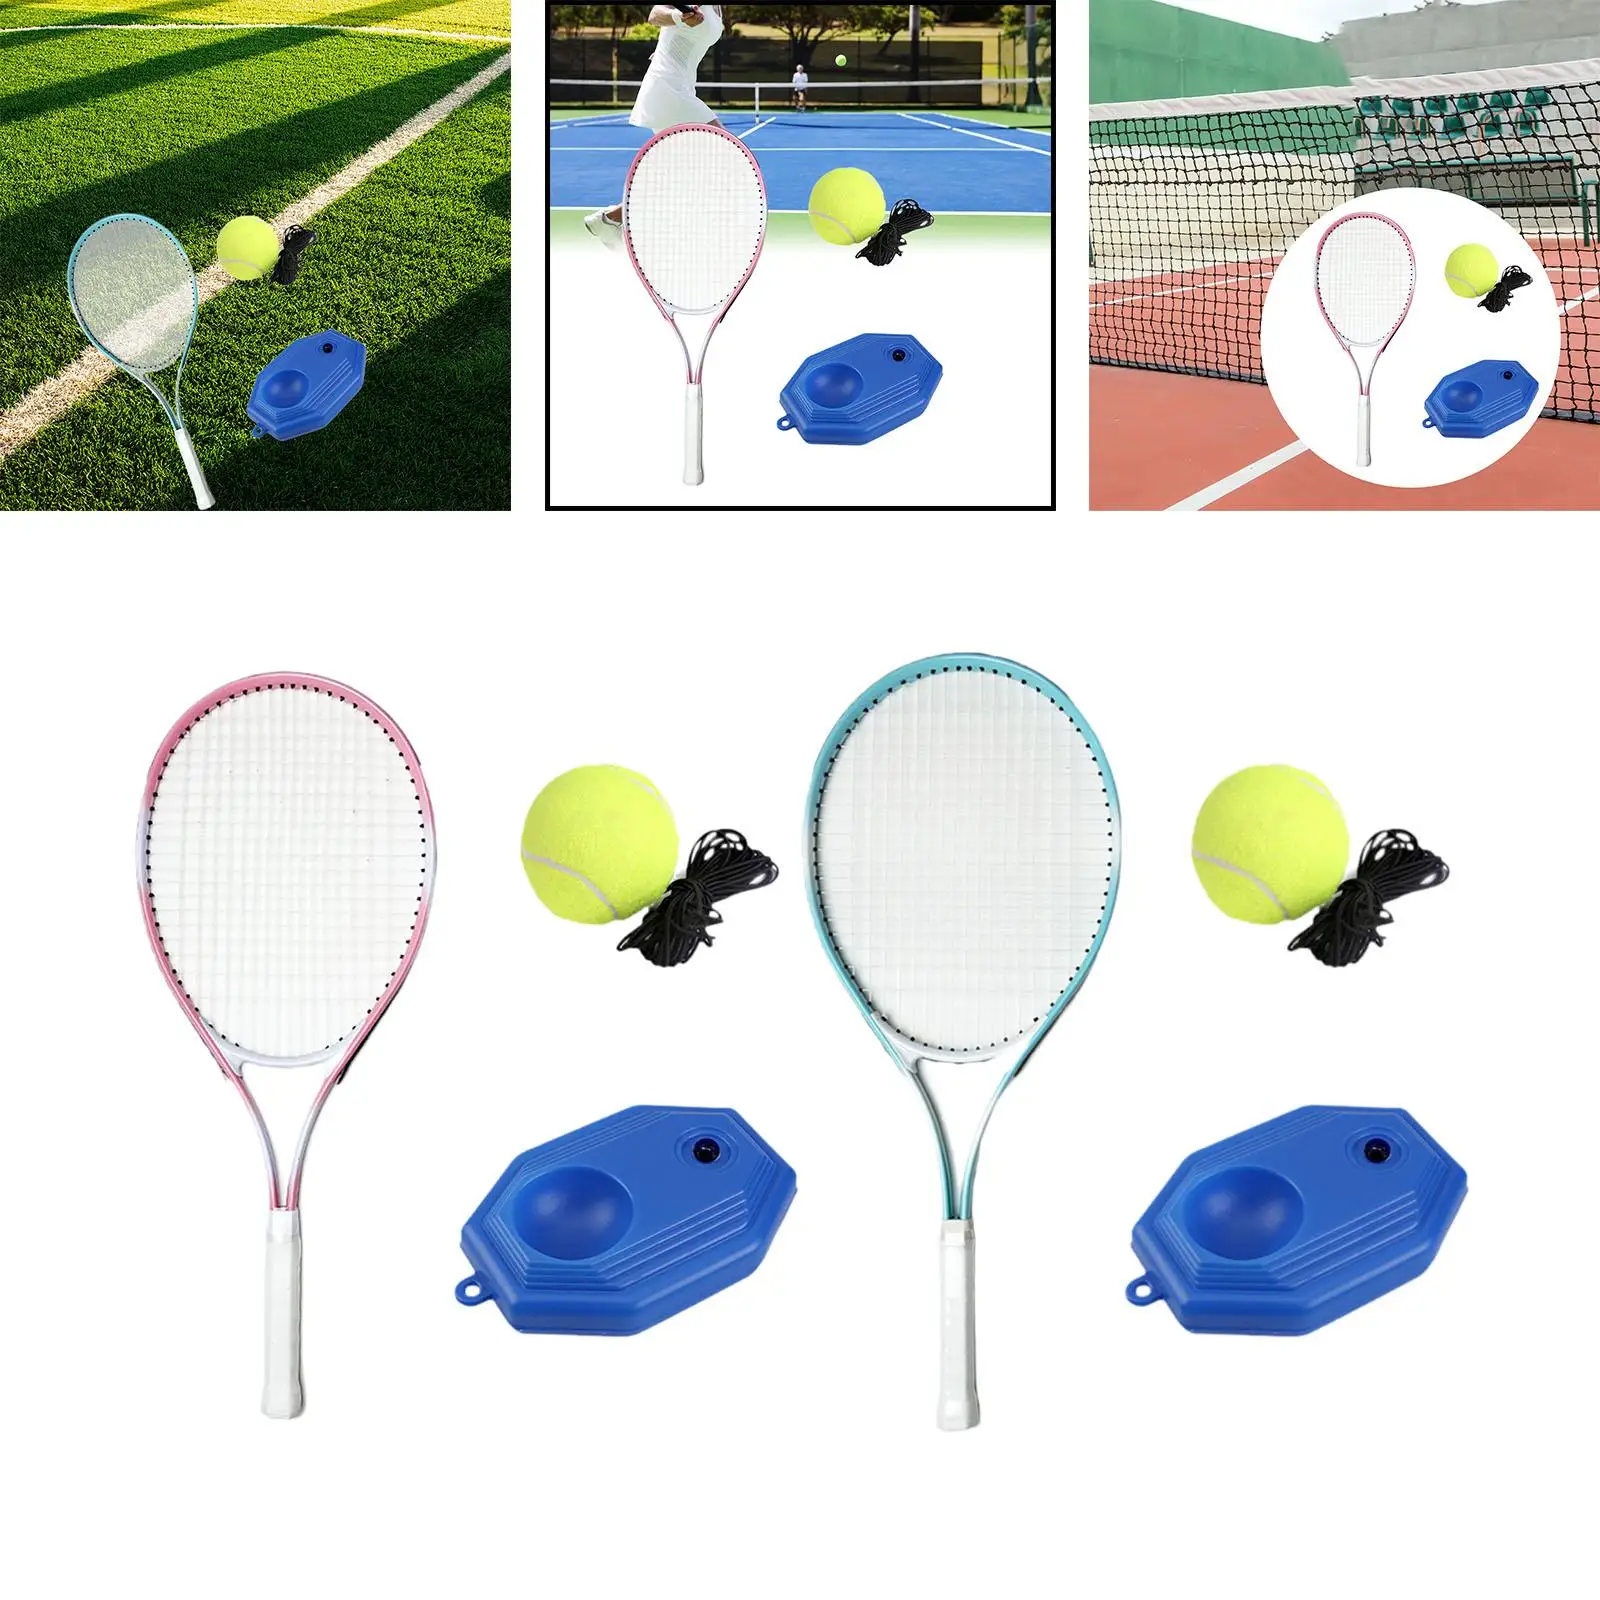 

Tennis Trainer Rebound Ball Self Practice Professional Aid Exercise Portable for